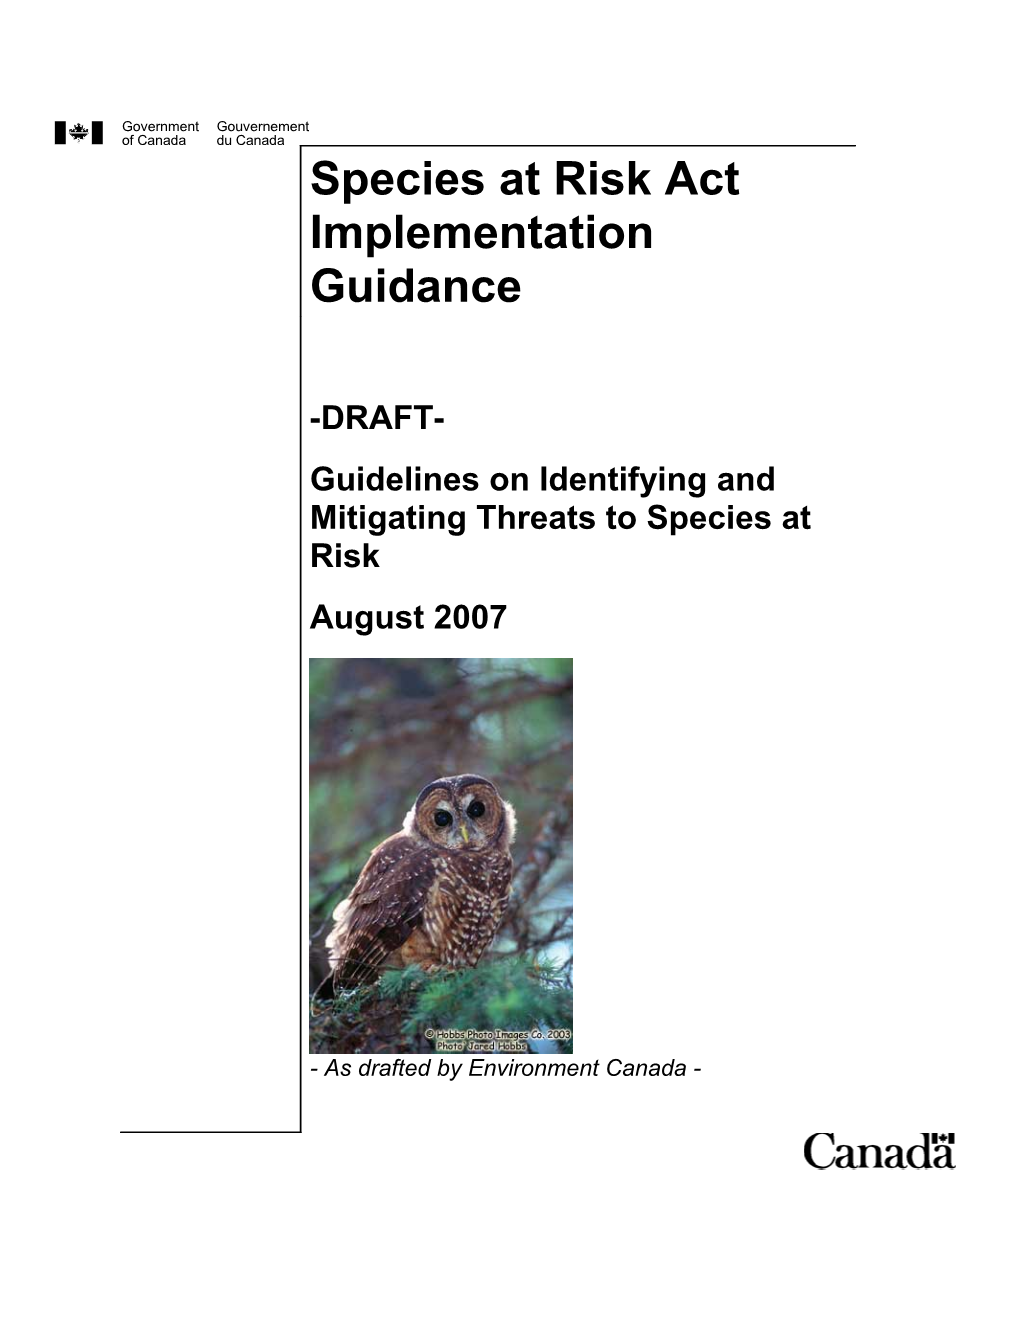 Technical Guidelines for Identifying Threats to the Survival and Recovery of Species at Risk